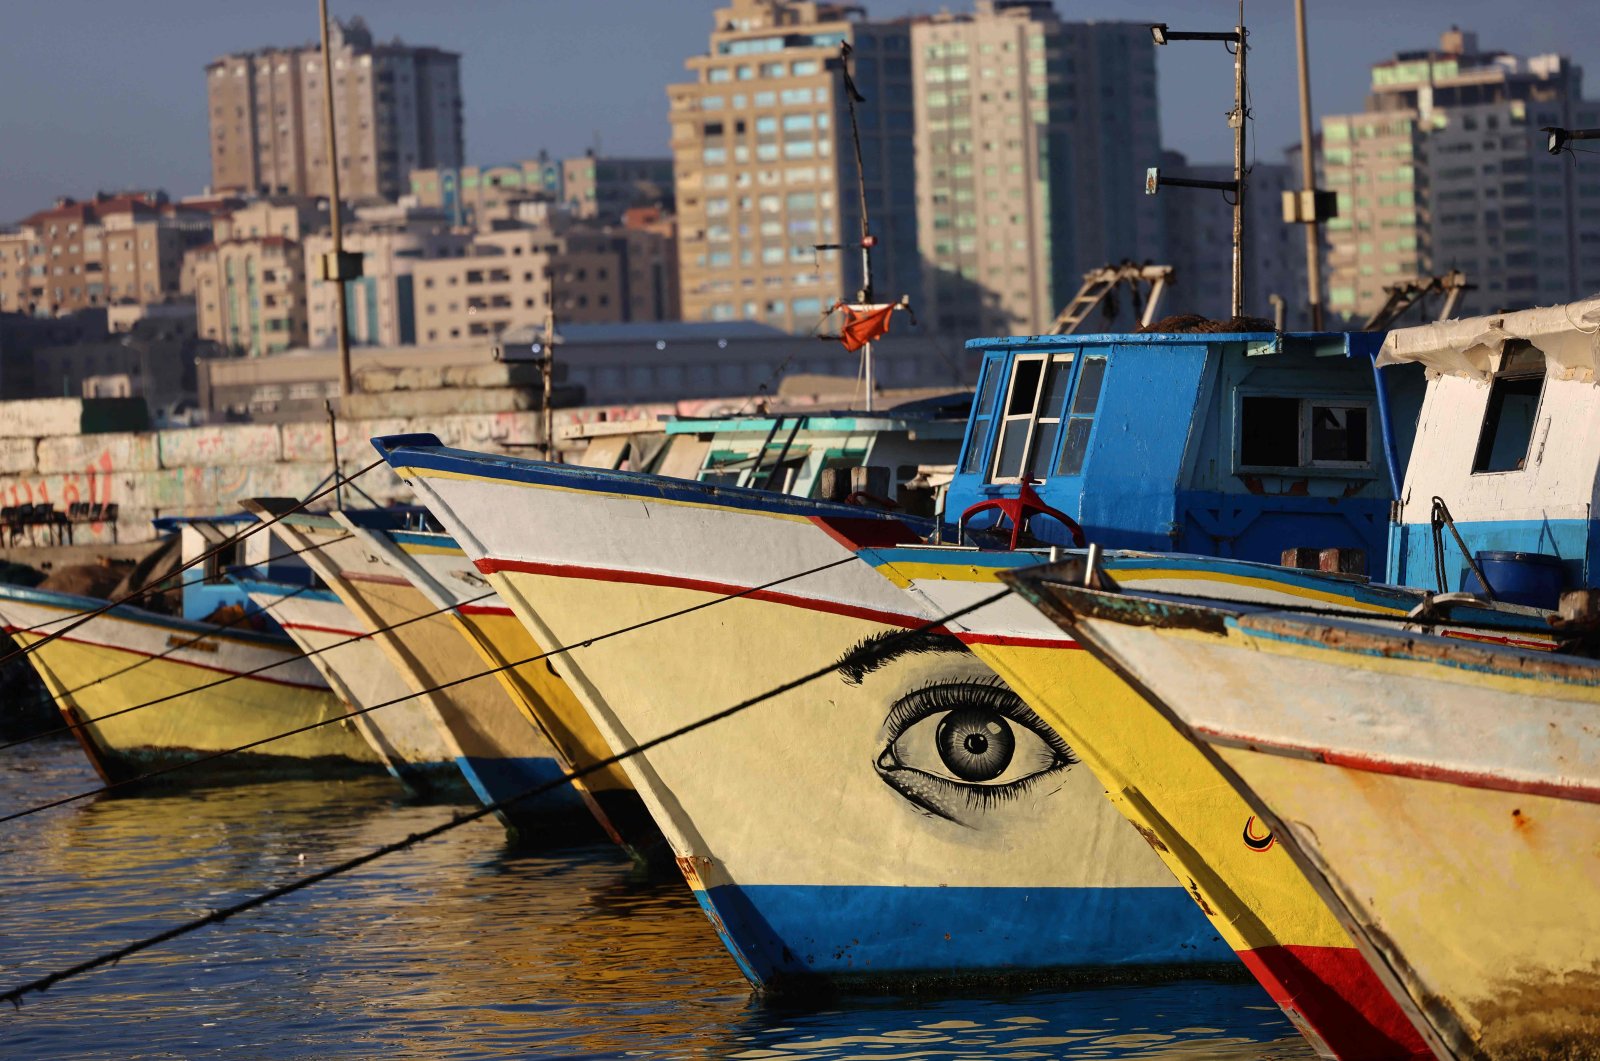 Palestinian boats remain moored at Gaza City's main fishing port as Israeli security forces allow only a limited number of vessels to return to sea following a cease-fire in the recent conflict, Gaza City, Gaza Strip, Palestine, May 24, 2021. (AFP Photo)